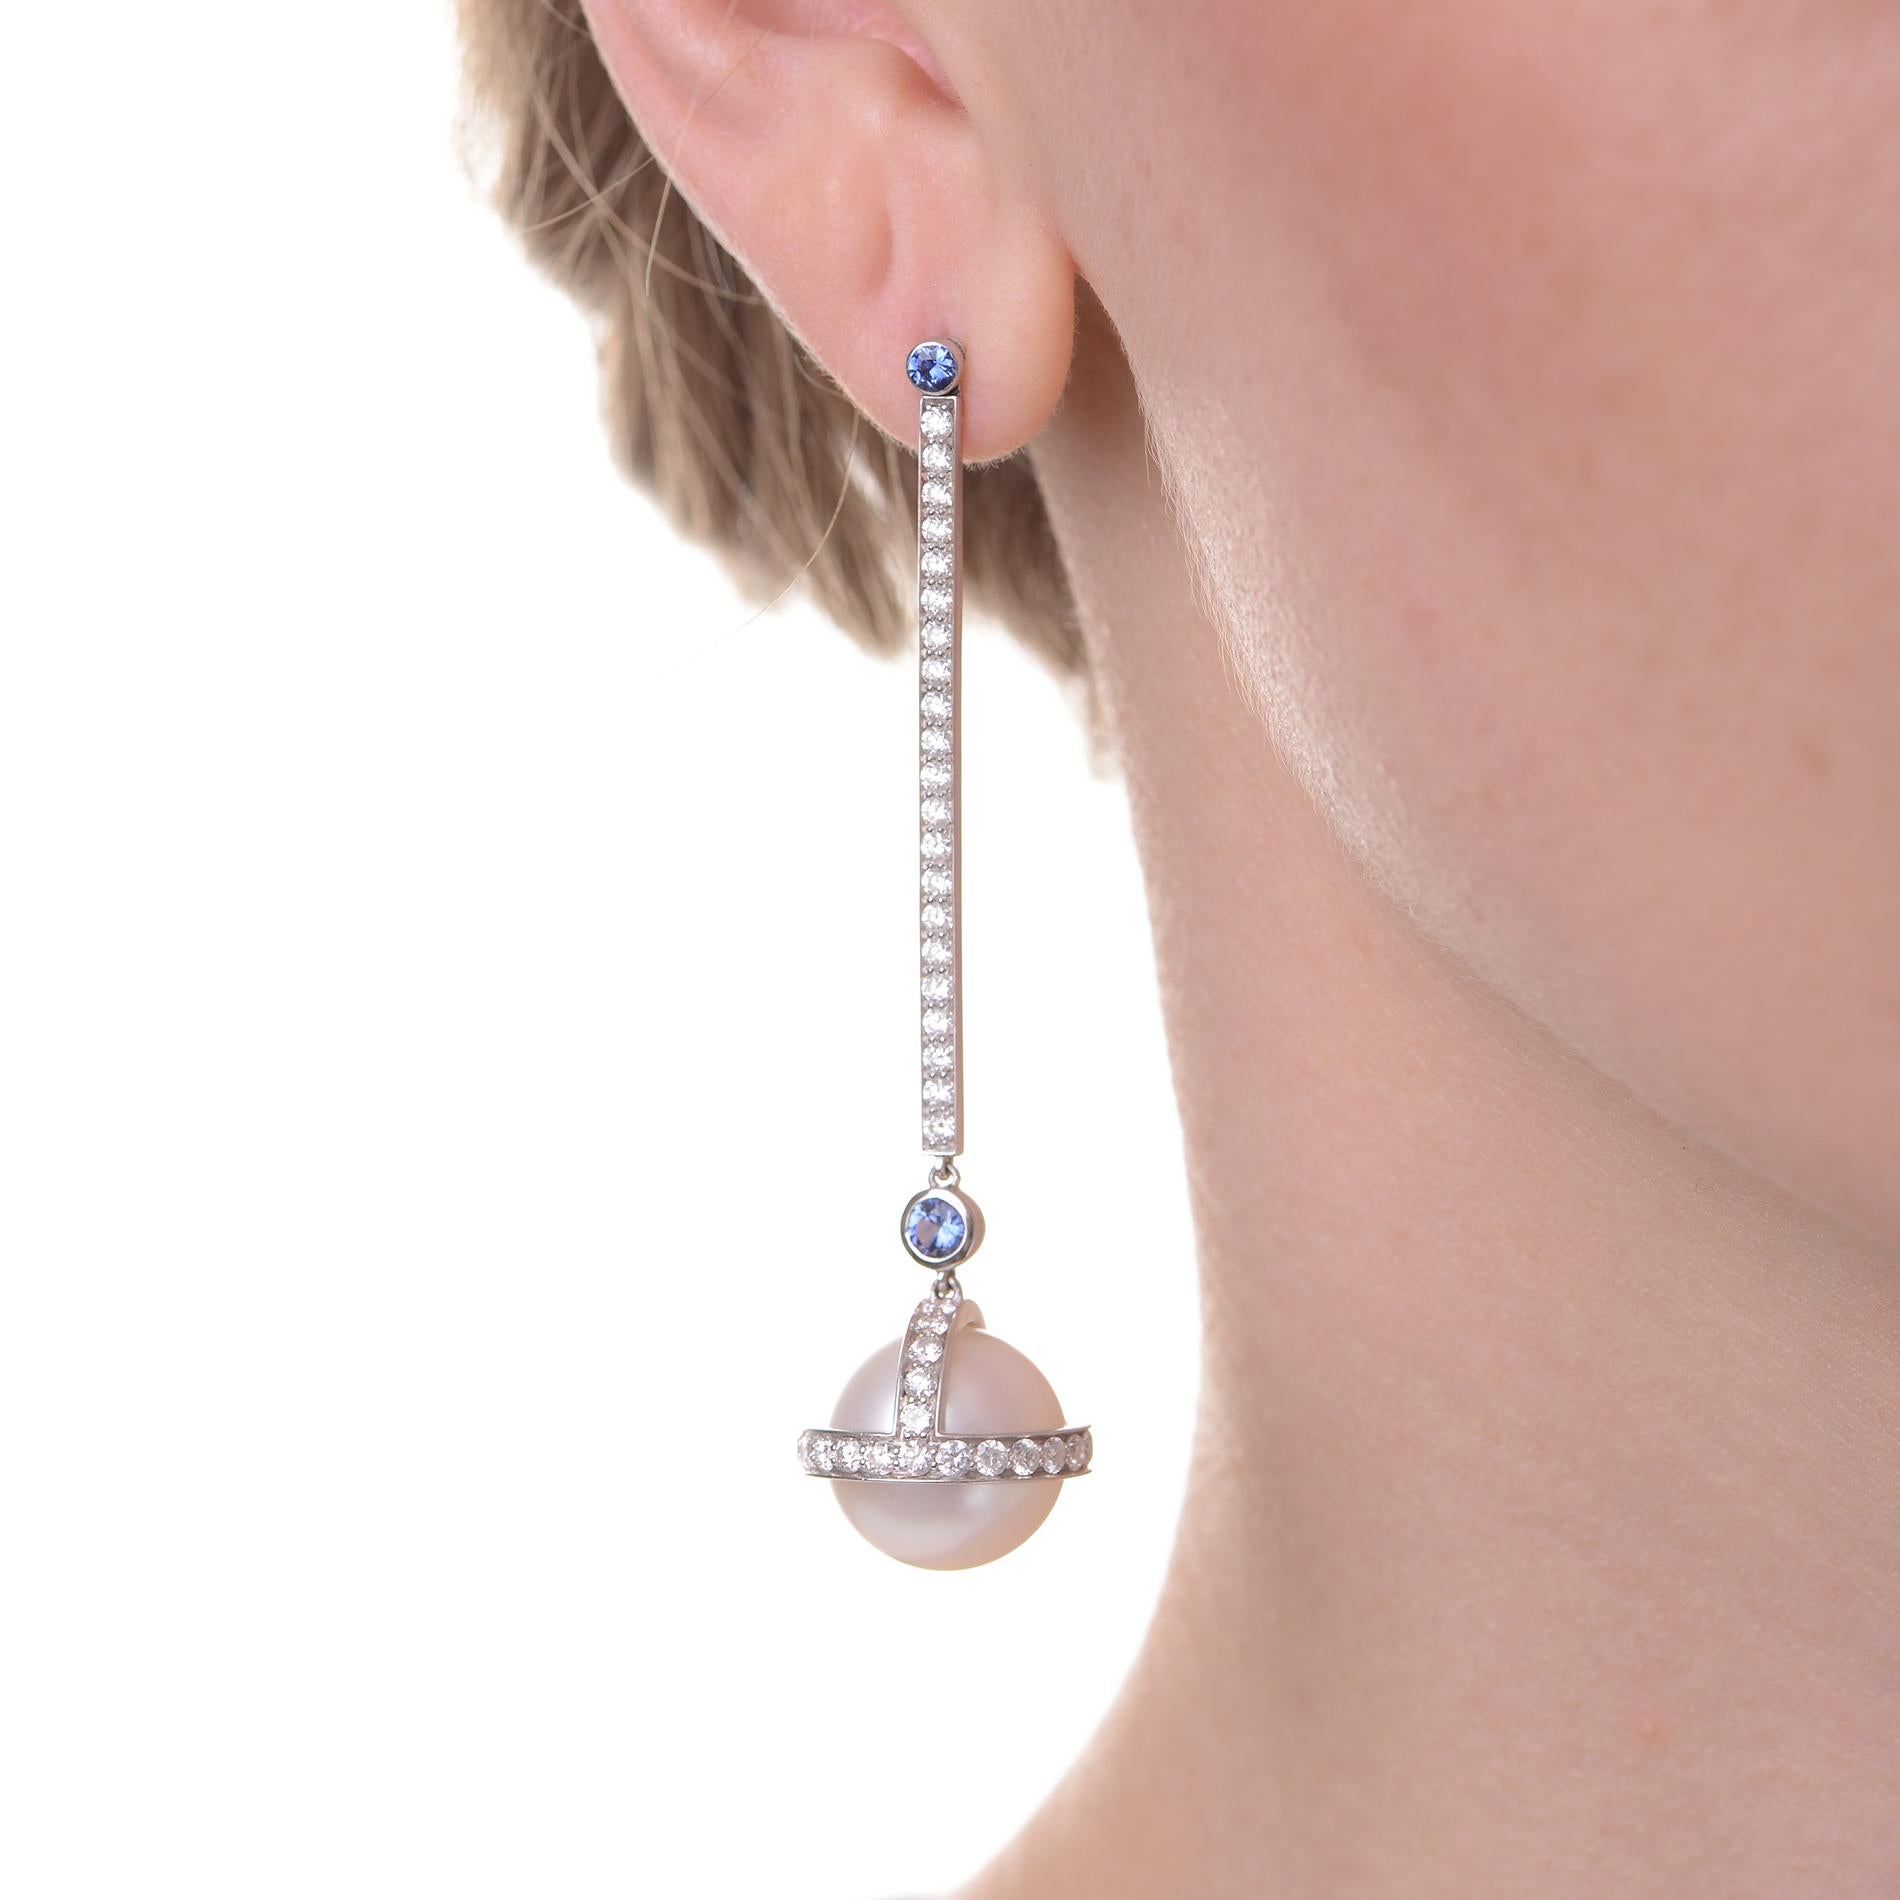 Contemporary Sybarite Sceptre Drop Earrings in White Gold with White Diamonds & Sapphire